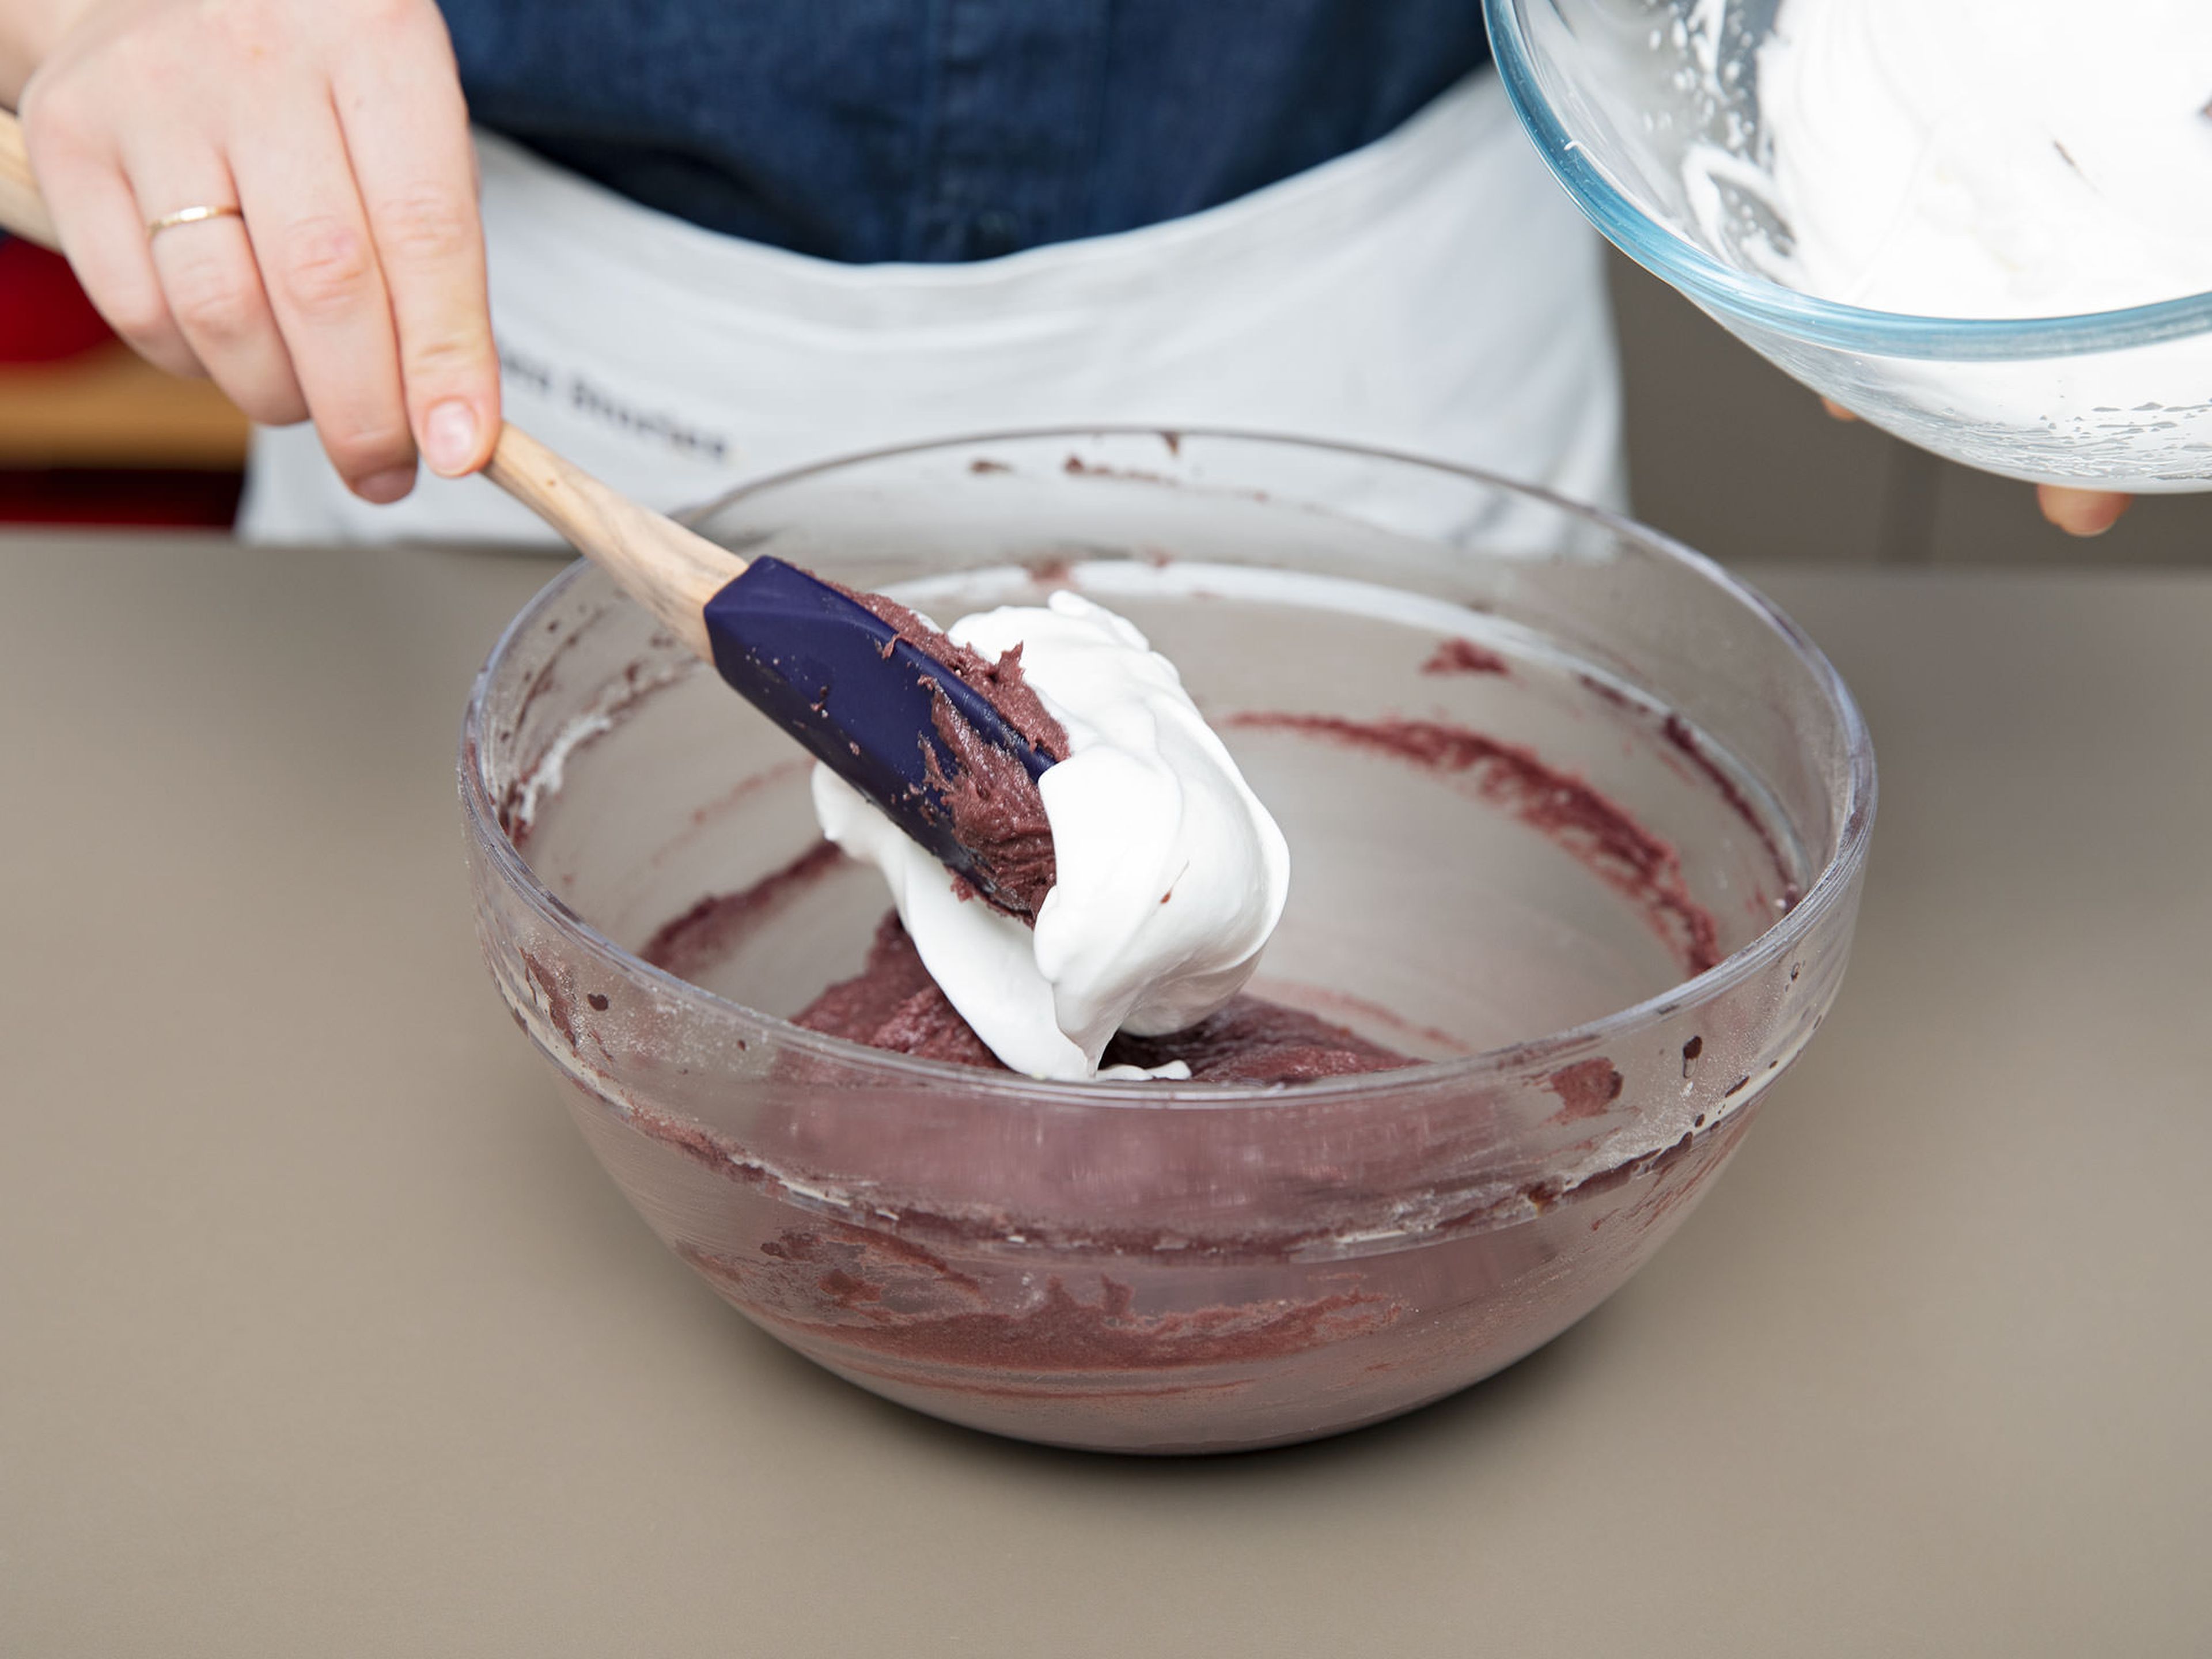 In a separate bowl, beat egg whites until stiff and fluffy, and fold into batter.